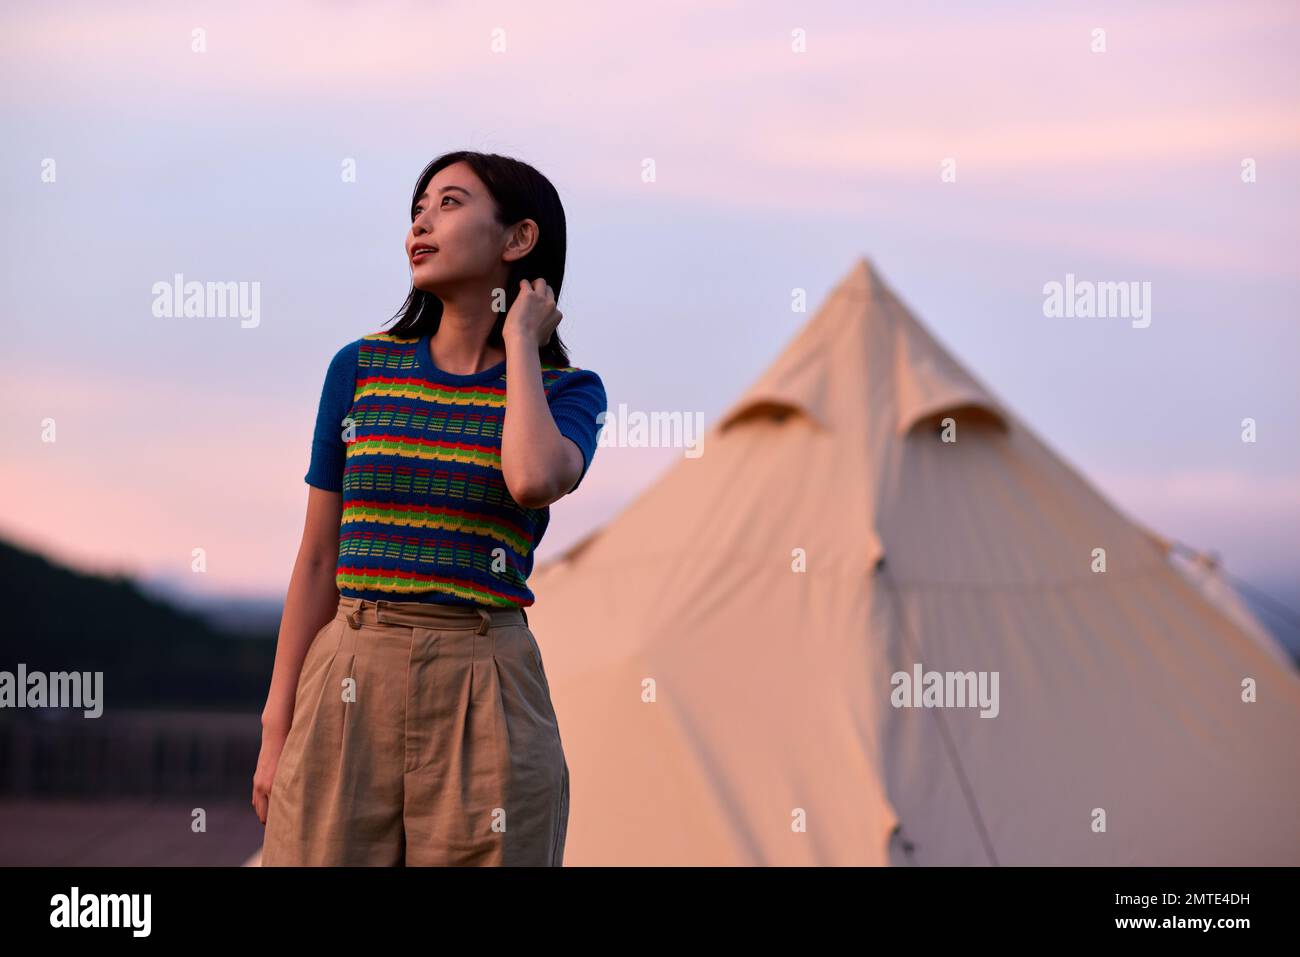 Young Japanese woman portrait at campsite Stock Photo